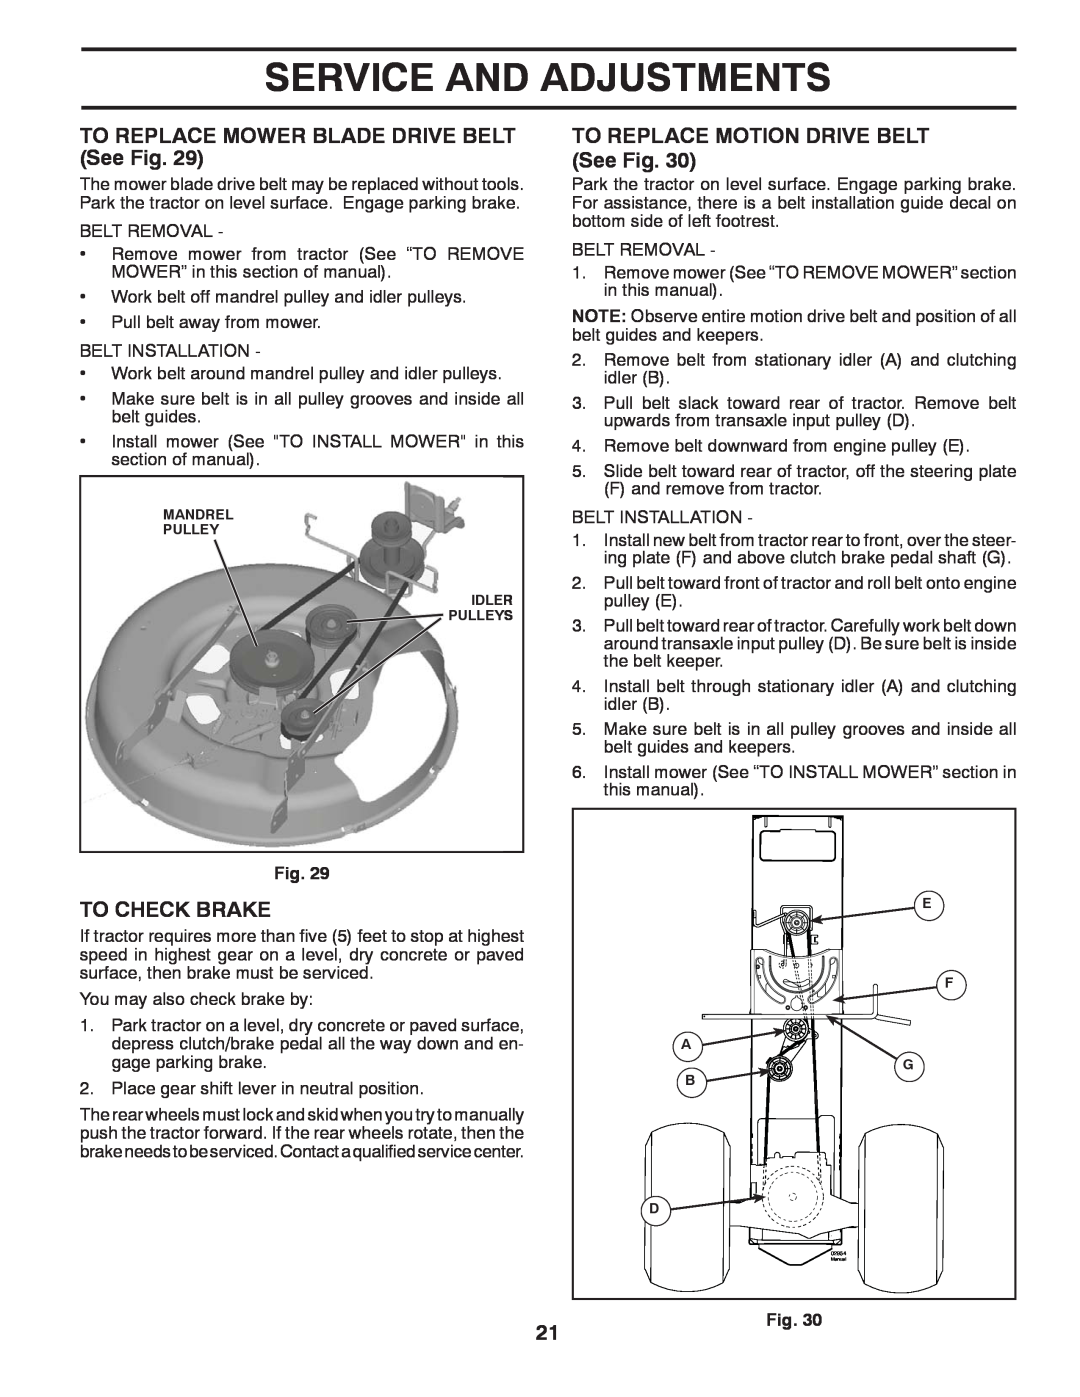 Poulan PXT12530 Service And Adjustments, TO REPLACE MOWER BLADE DRIVE BELT See Fig, TO REPLACE MOTION DRIVE BELT See Fig 